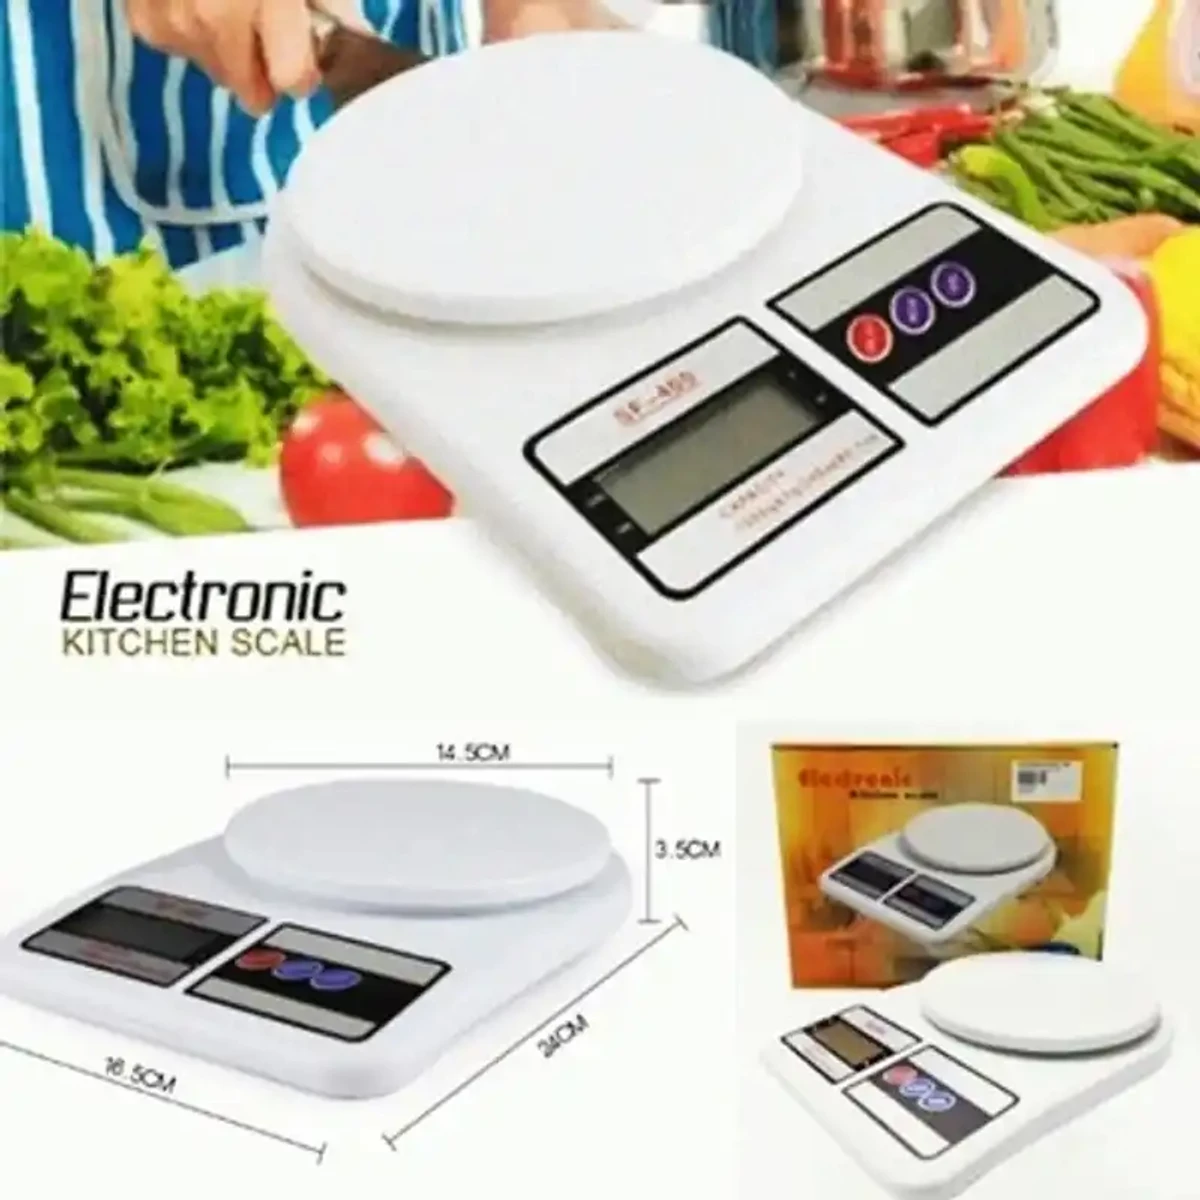 DIGITAL ELECTRONIC KITCHEN SCALE